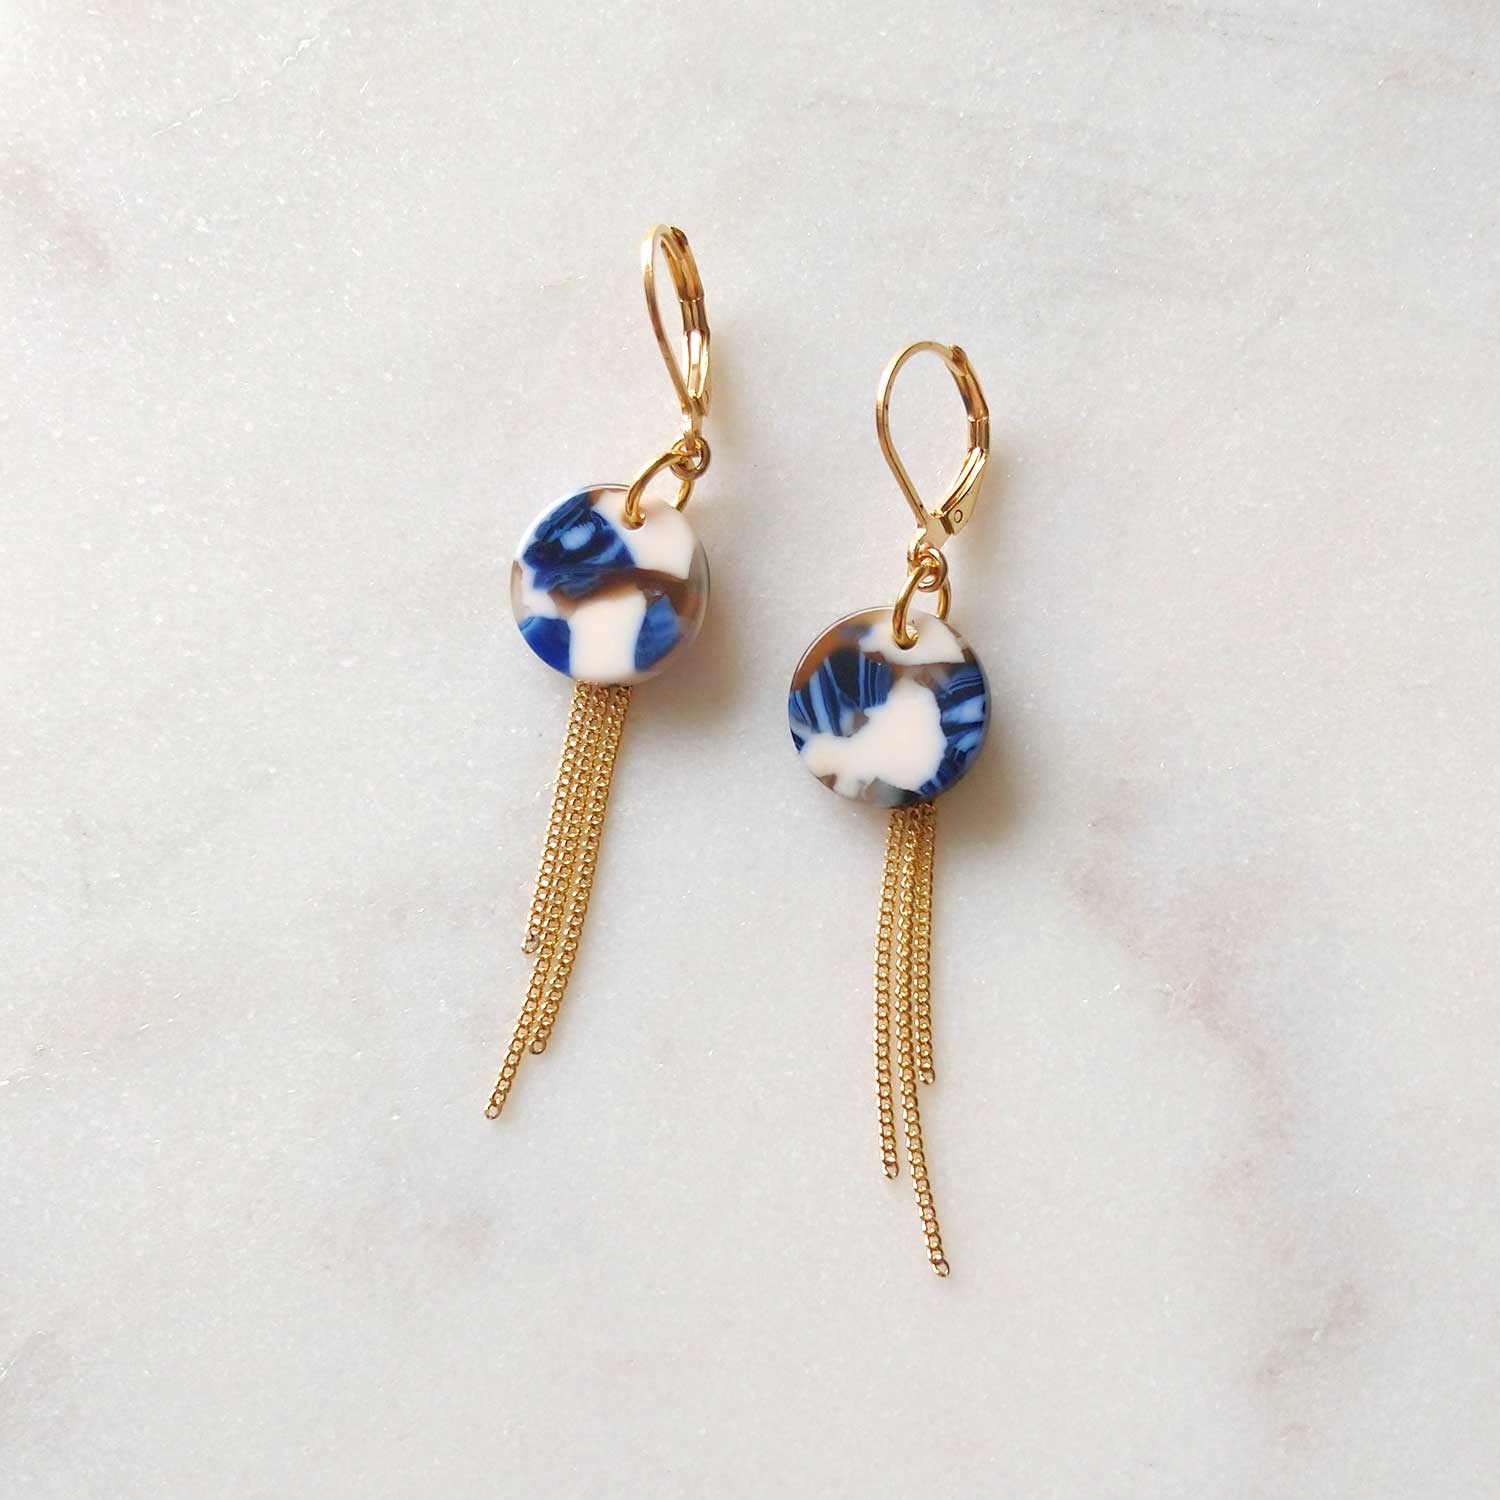 Blue and white earrings gold